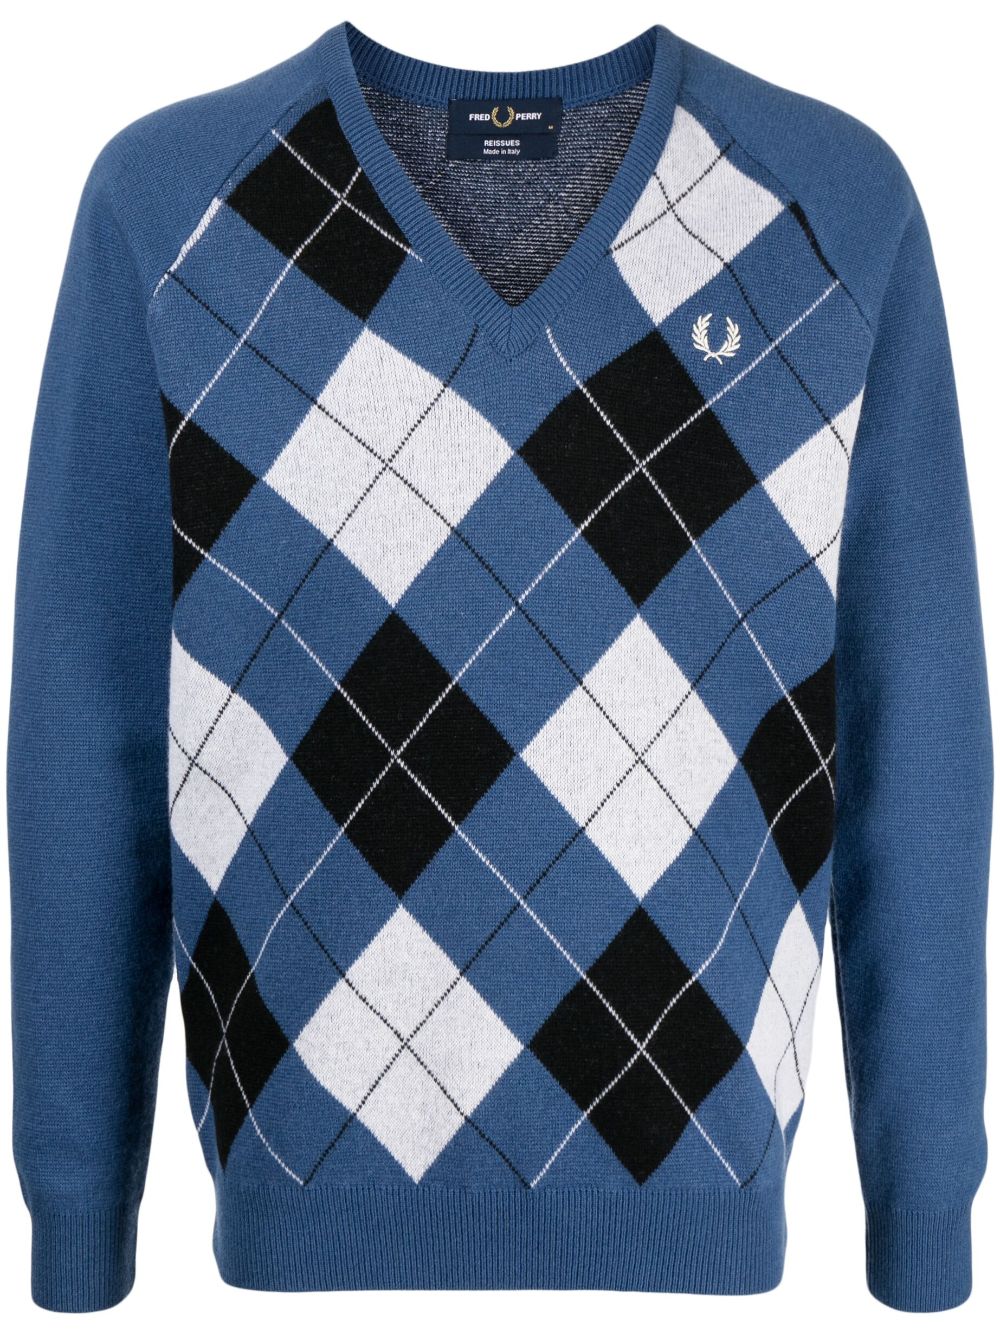 Fred Perry embroidered logo checked jumper - Blue von Fred Perry